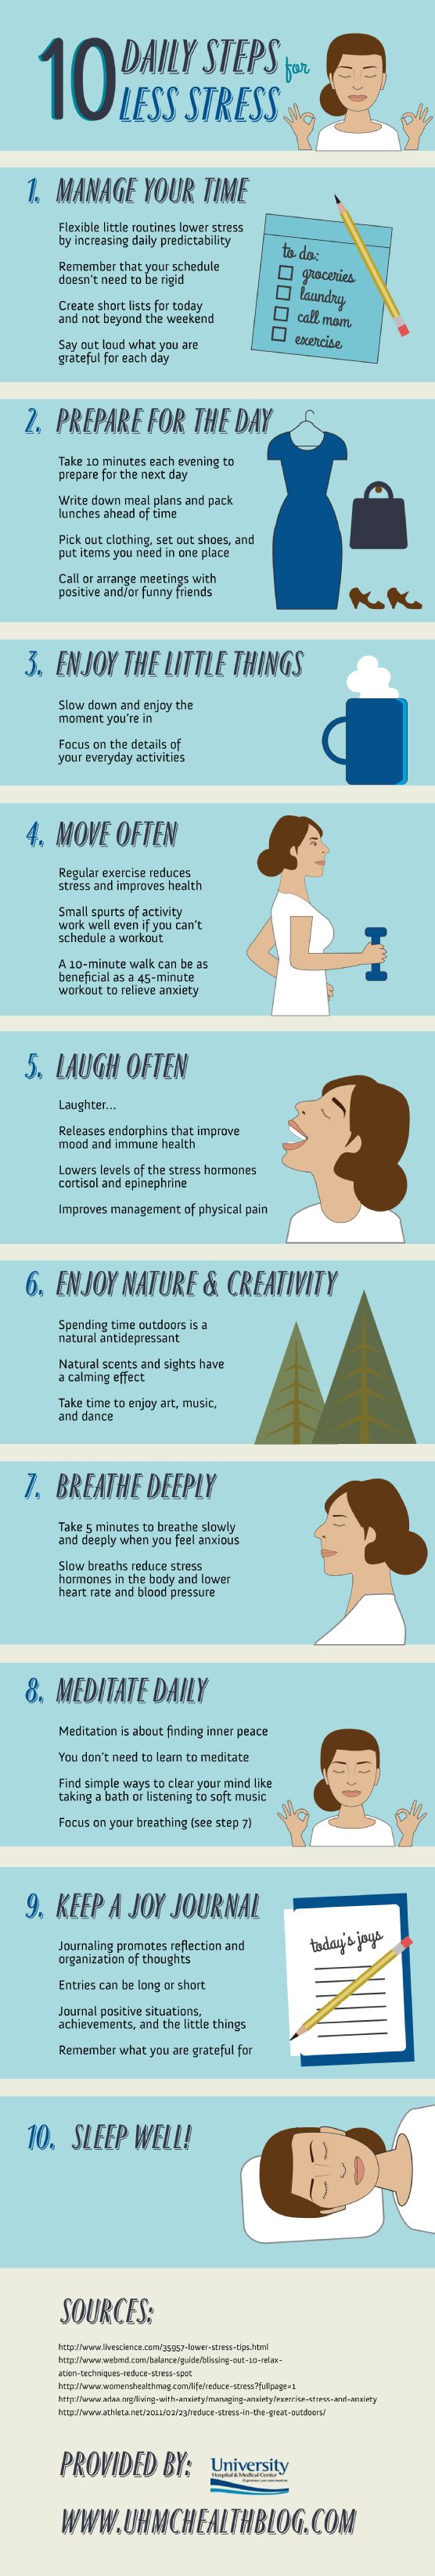 10 Daily Steps for Less Stress. 